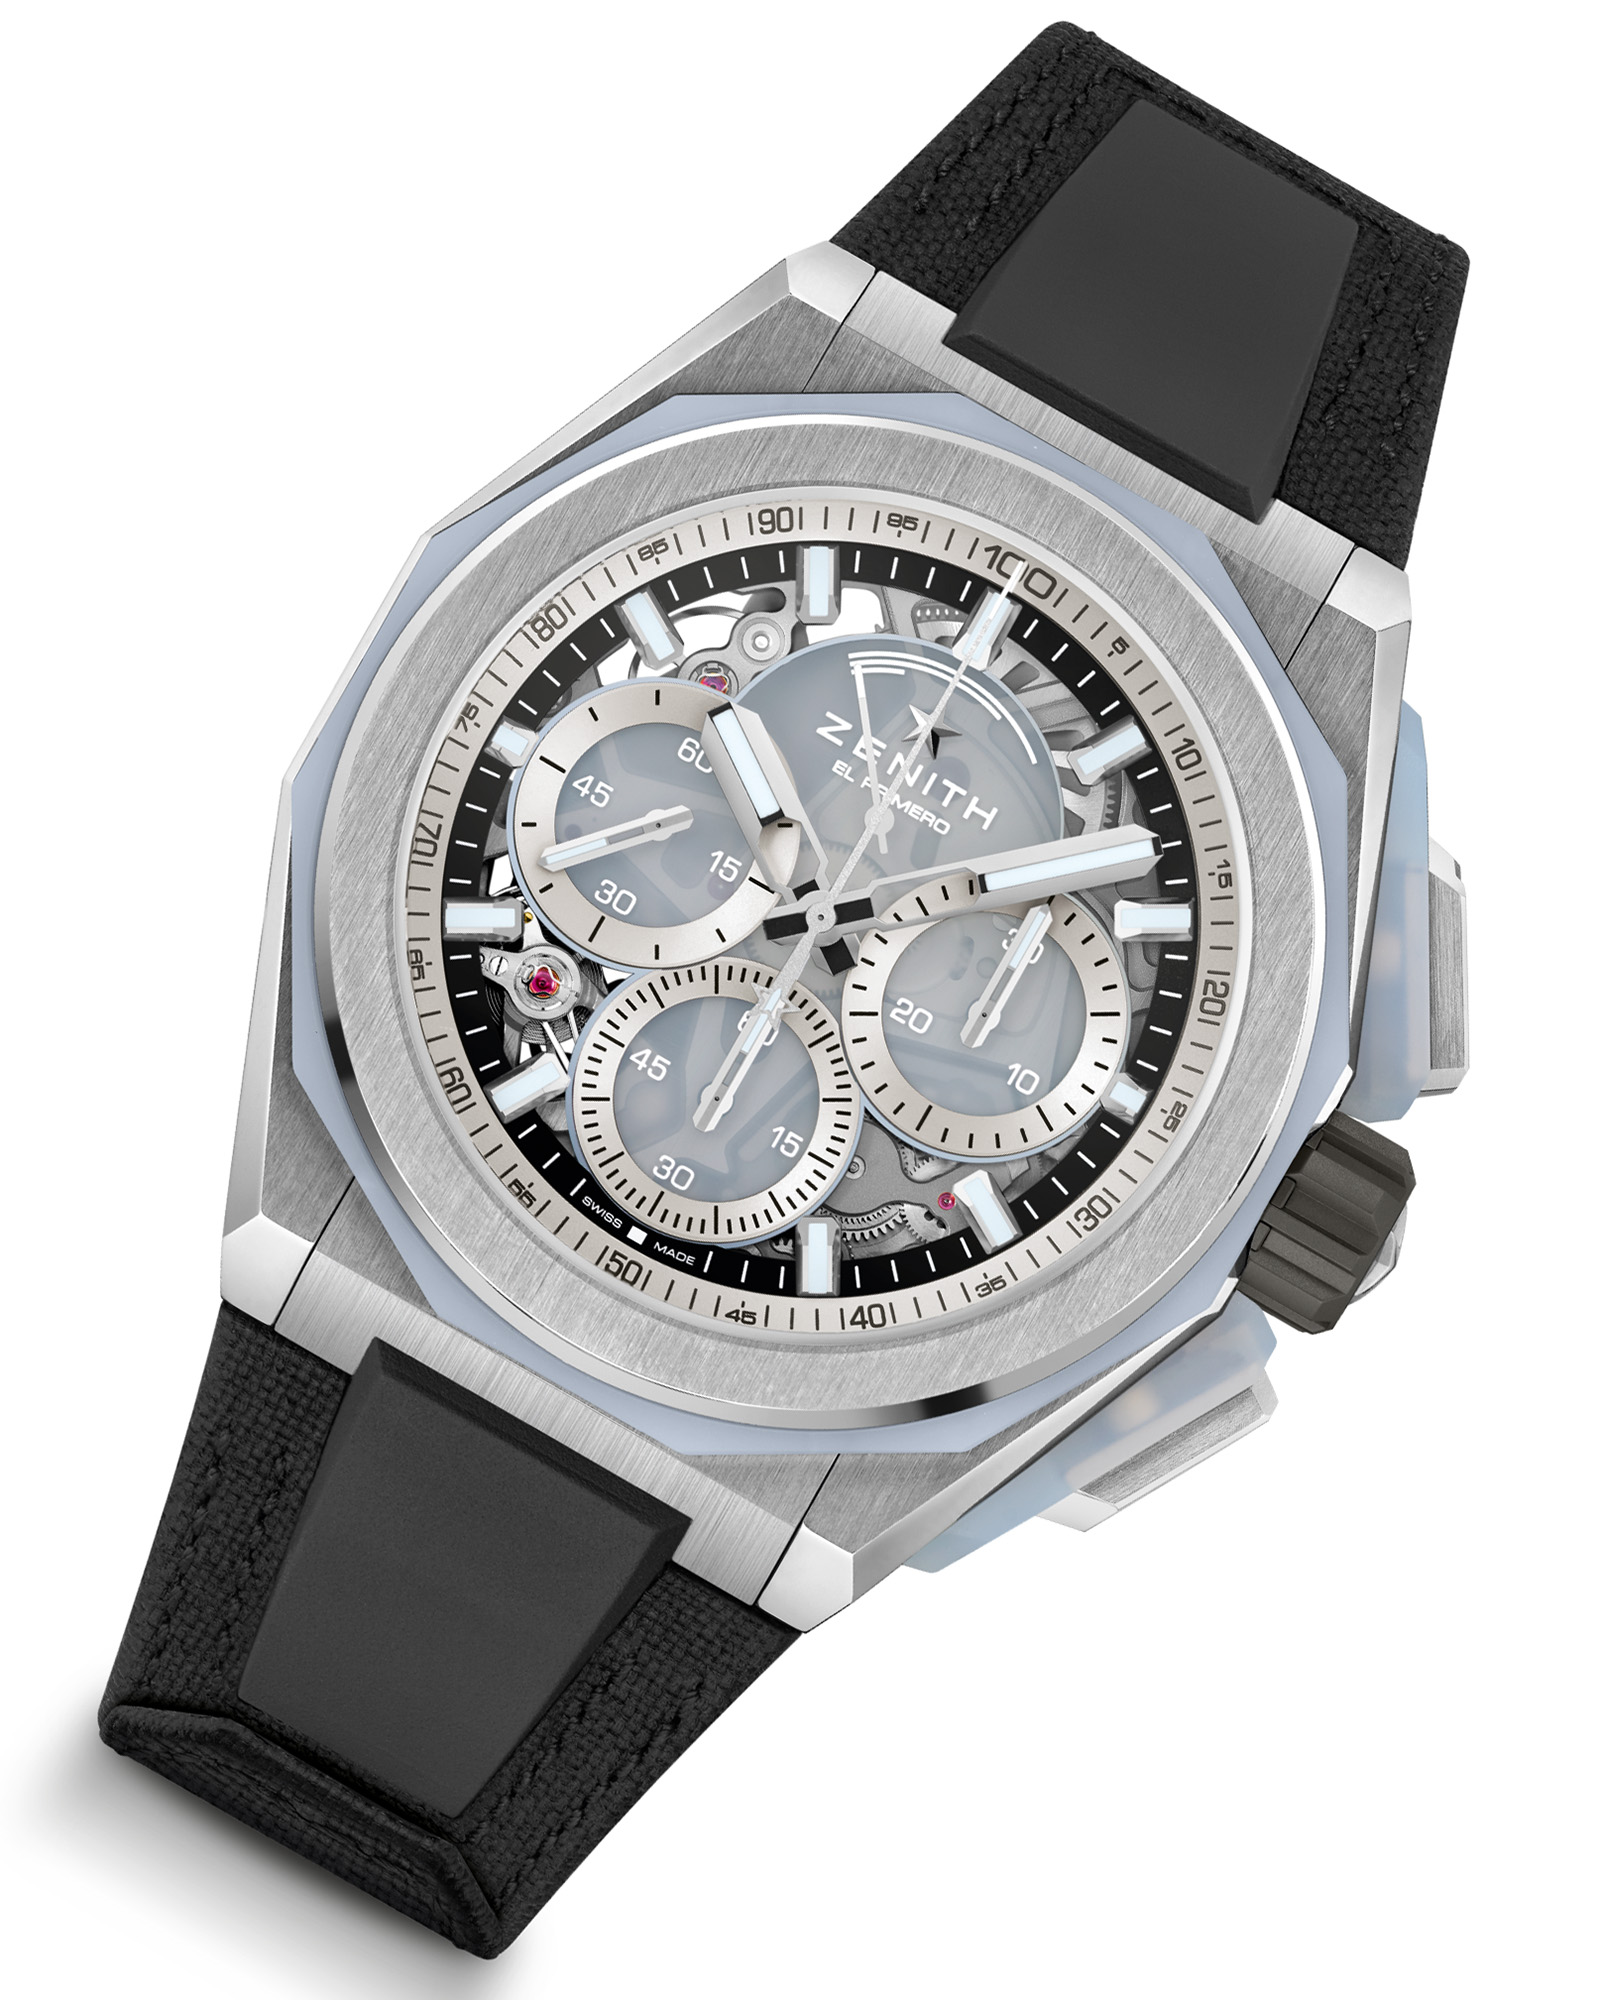 Zenith Defy Xtreme Open Sea Limited Edition